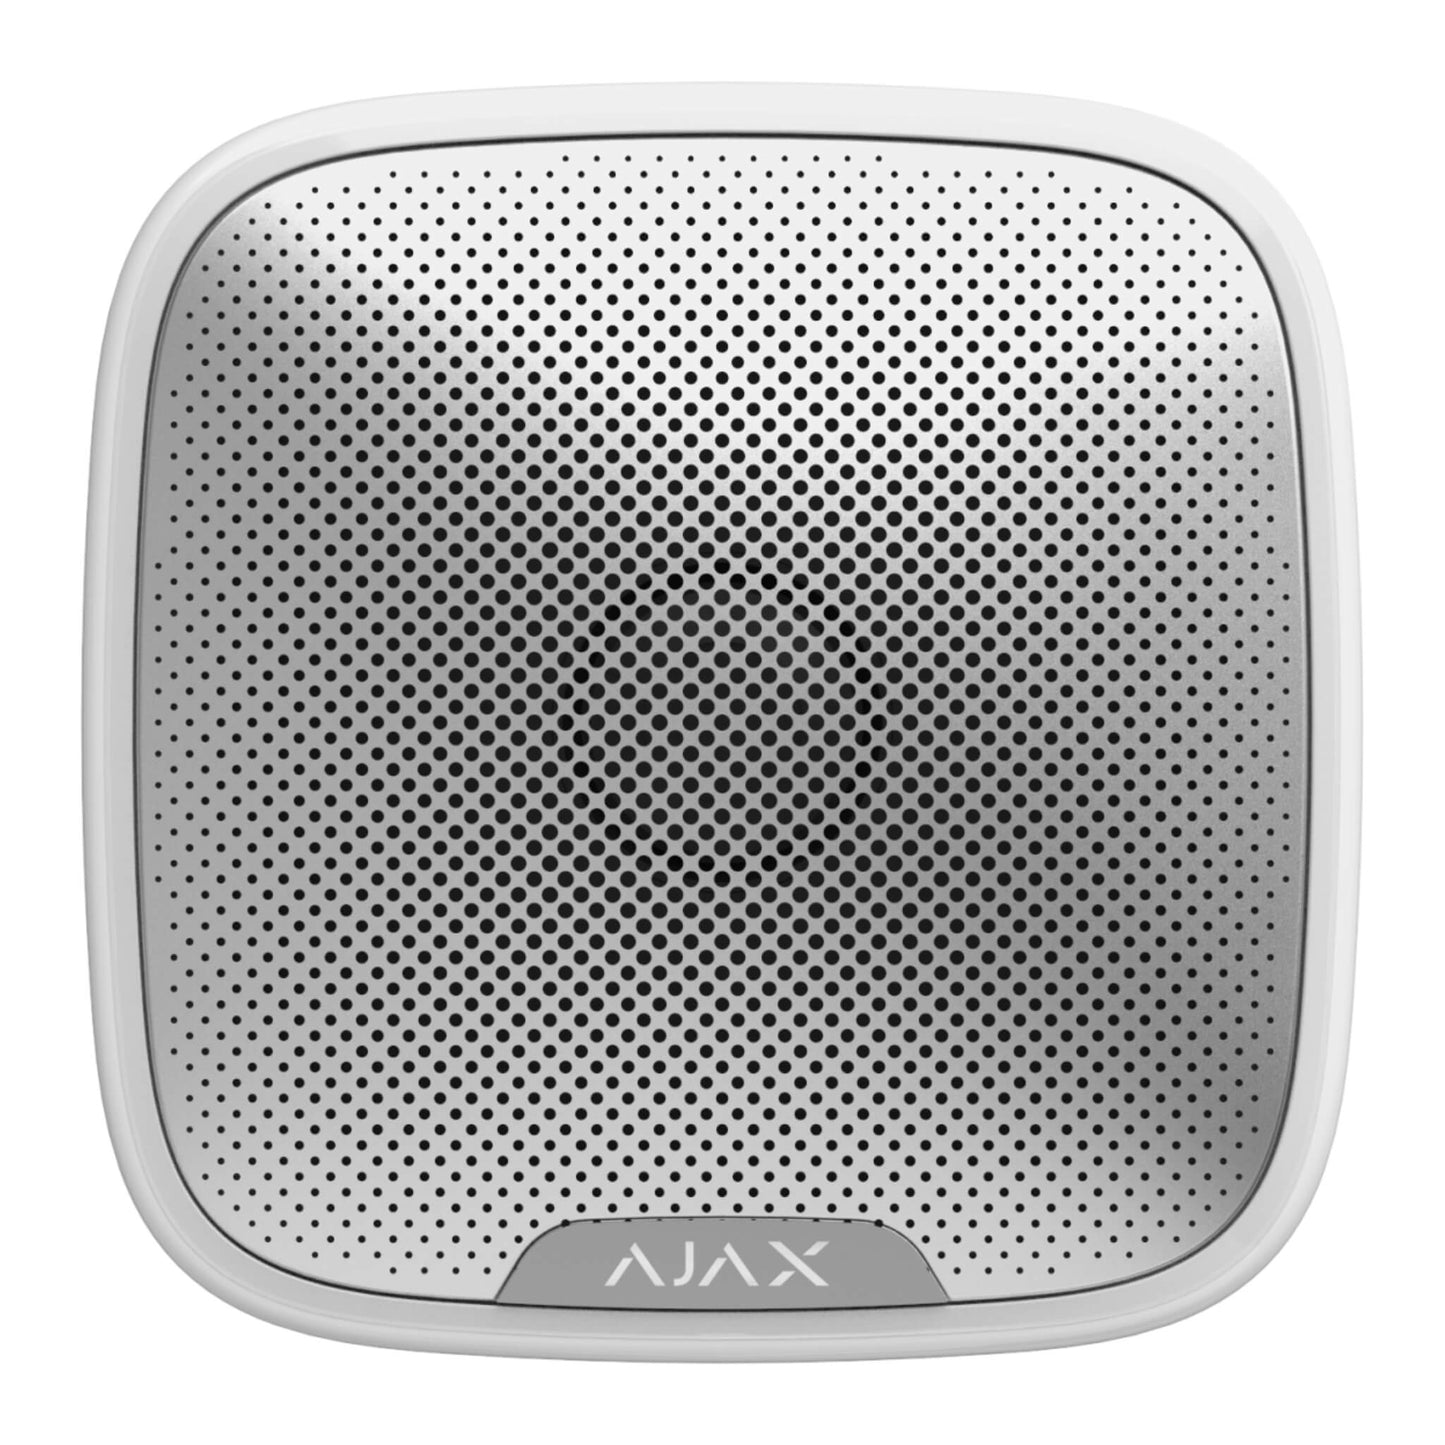 White Ajax StreetSiren - a wireless siren for indoor or outdoor use, used for Ajax security systems, for smart home and business security. 75 × 76 × 27 mm i size, 97grams in wieght, The siren comes in black or white color. Buy Ajax Security Systems online, front view of device shown